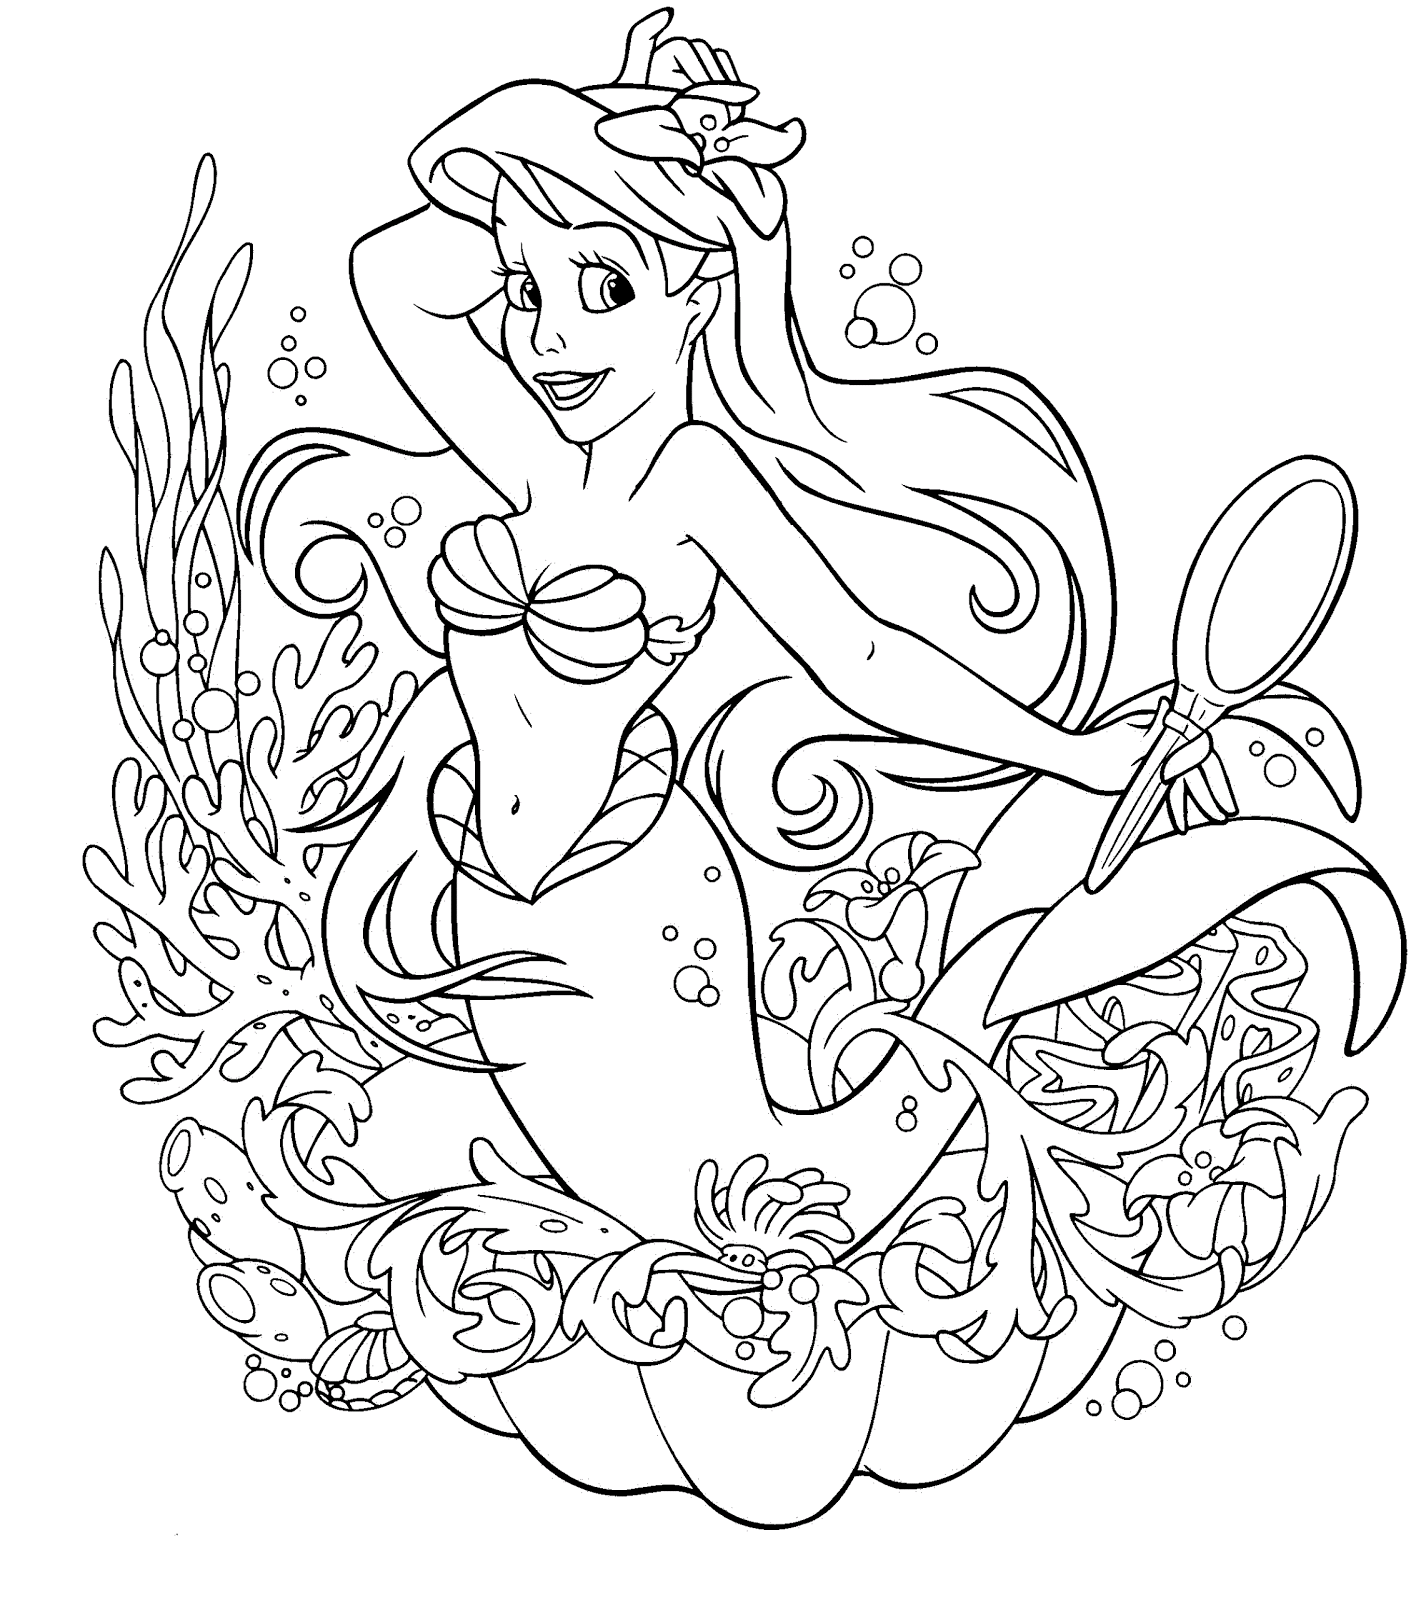 Mermaid Birthday Party Coloring Pages | Kids Coloring Pages